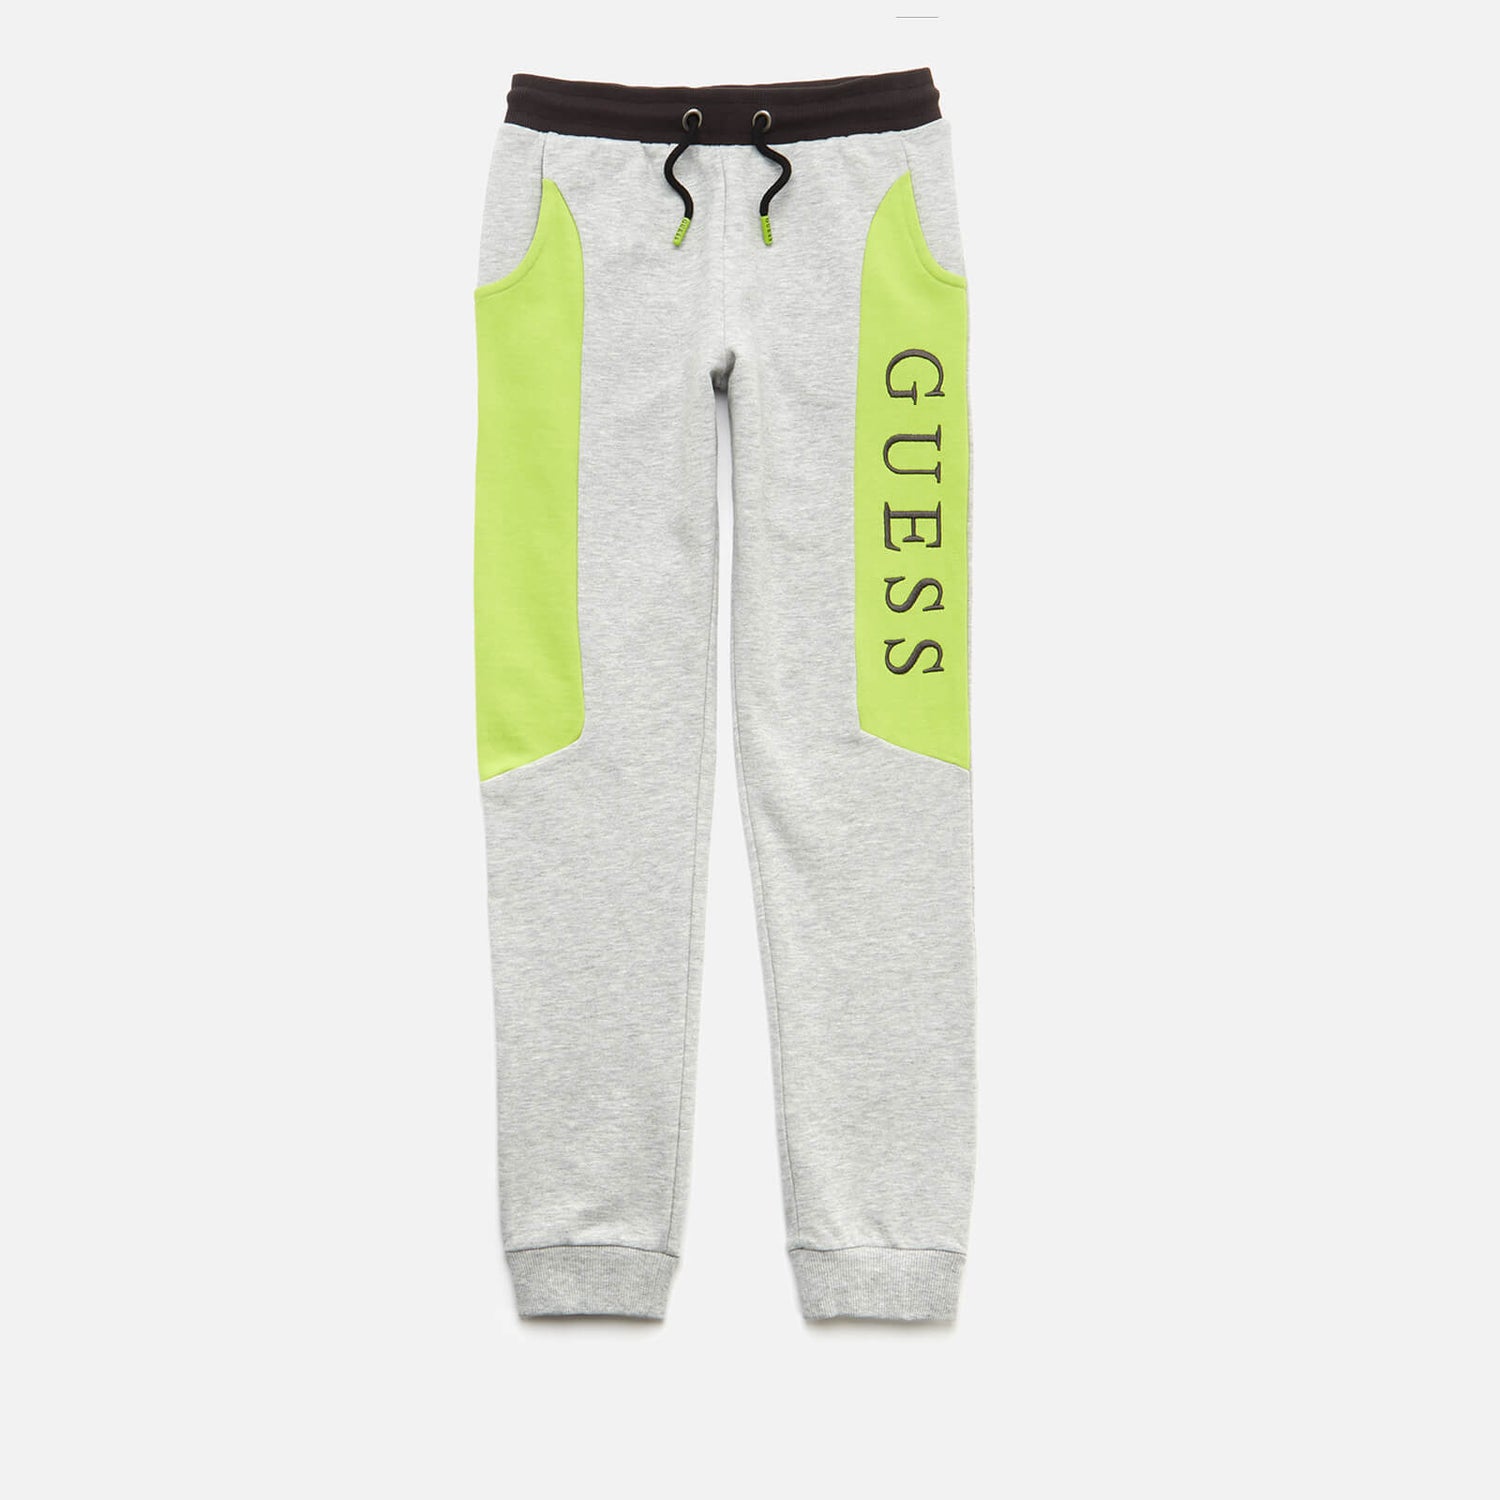 Guess Boys' Active Sweatpants - Lime Green Multi - 7 Years